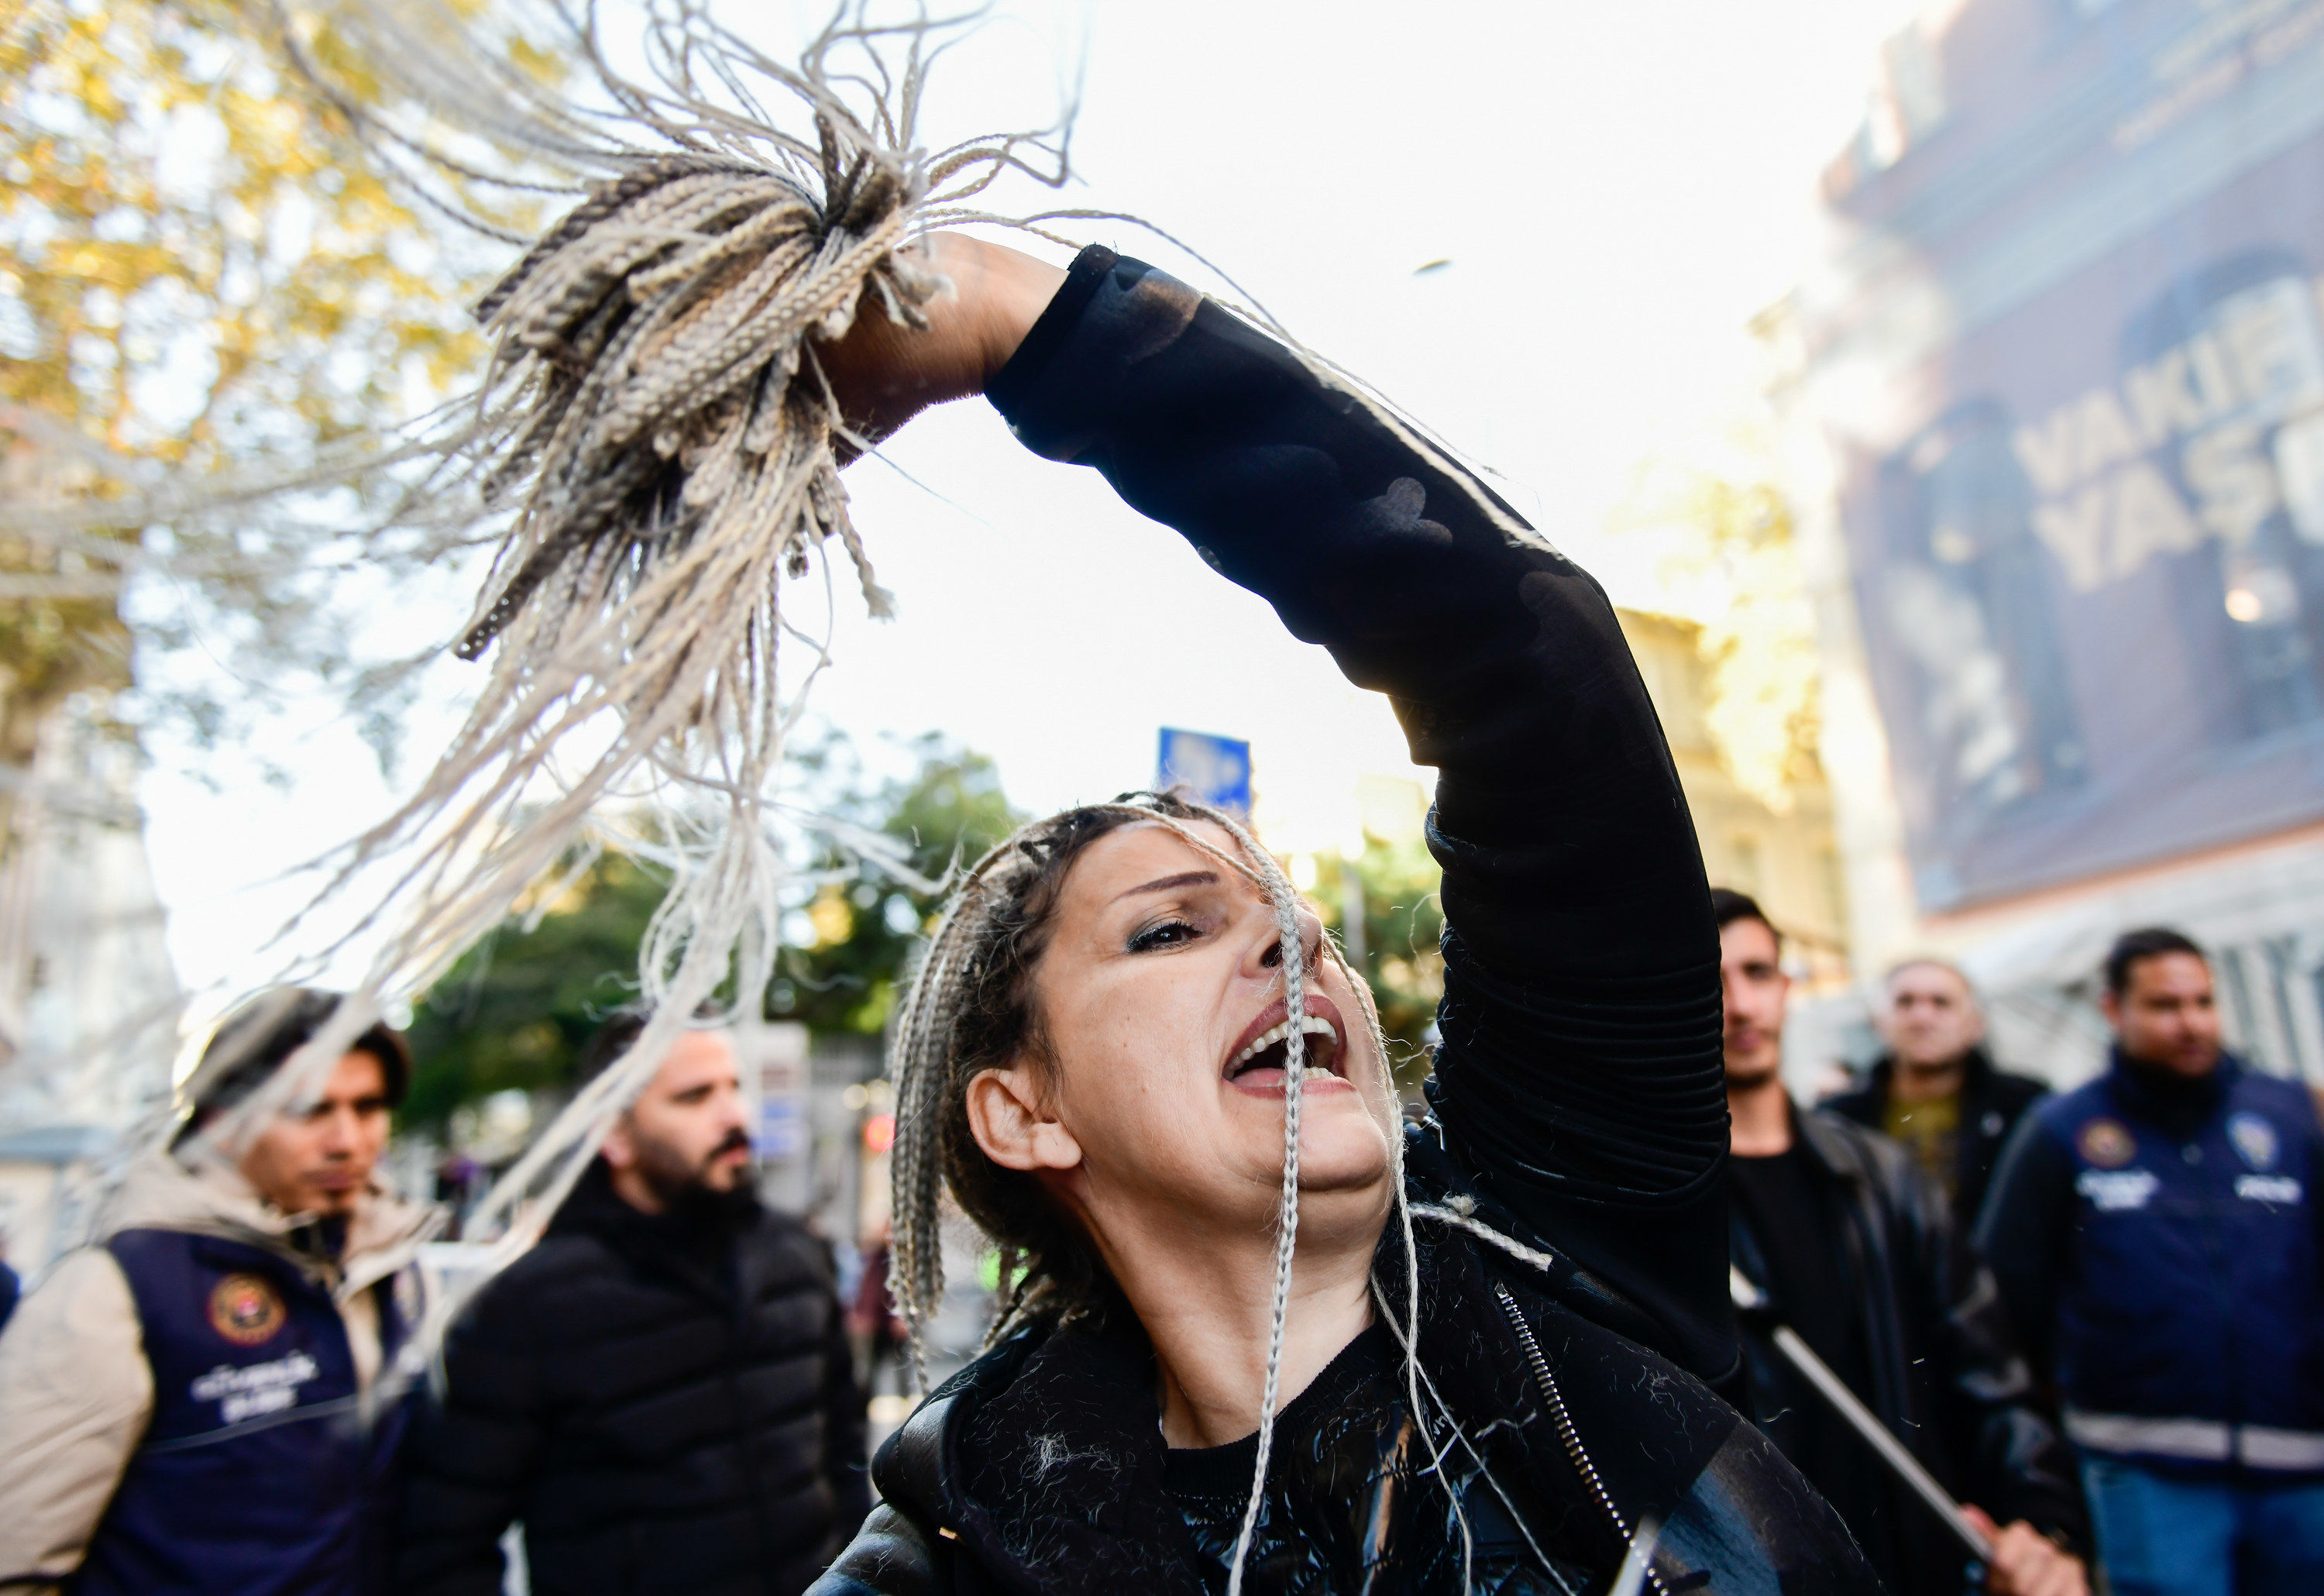 A protestor cuts her hair off as a show of protest against the Iranian government crackdown on conservative dress laws.